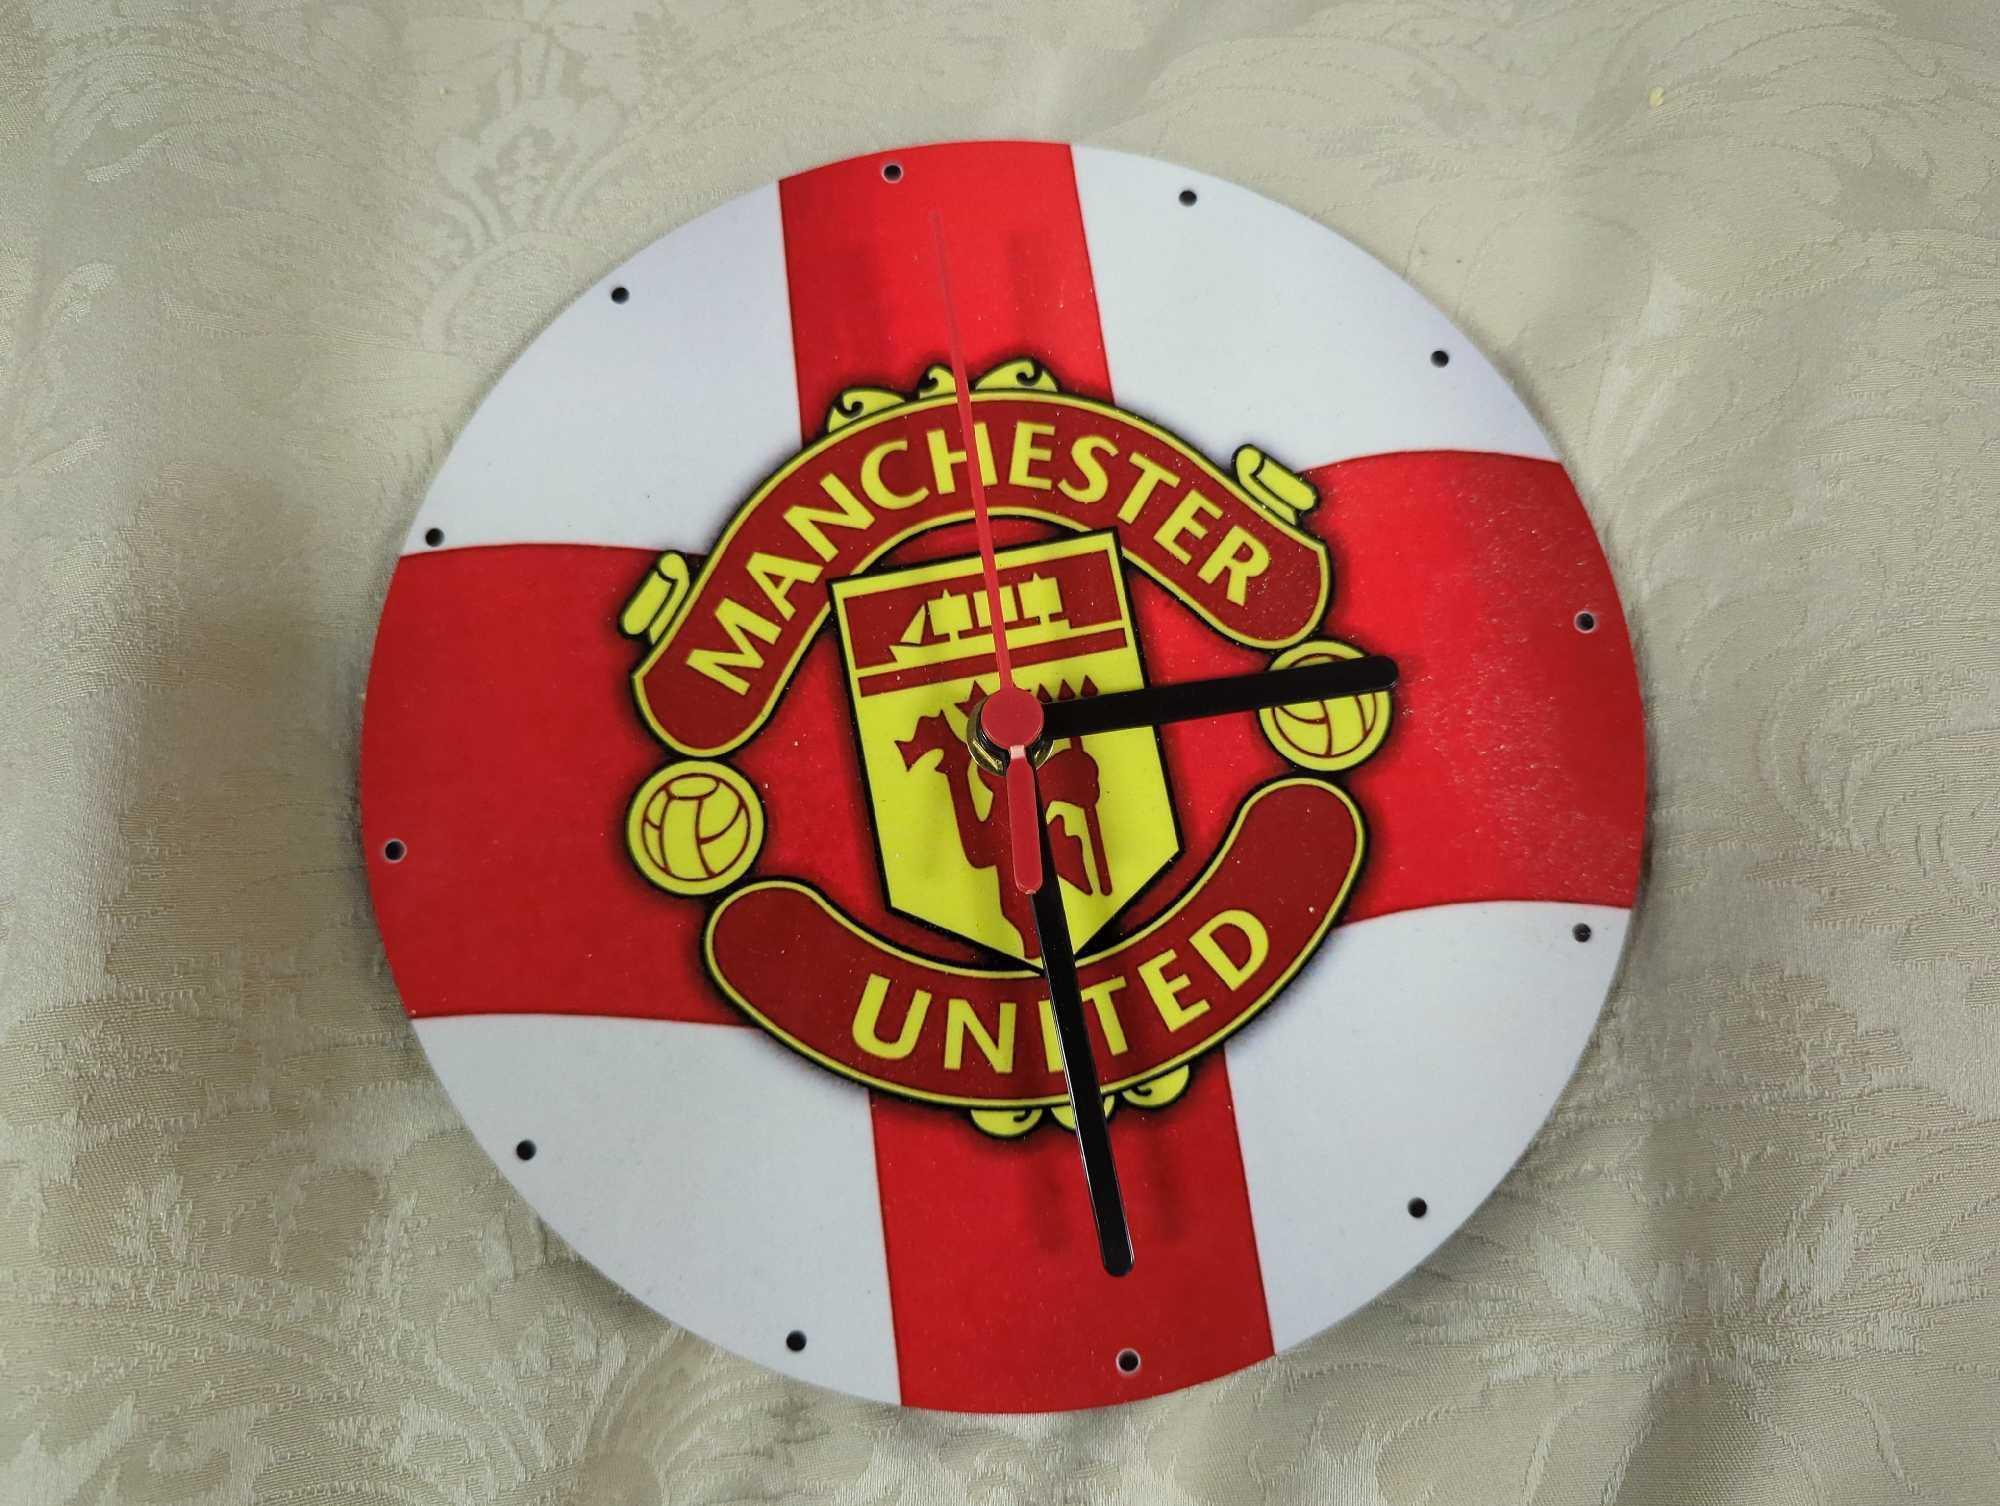 Manchester United bath mat (31"W x 19.5"H) and 8" matching wall clock. Comes as is shown in photos.